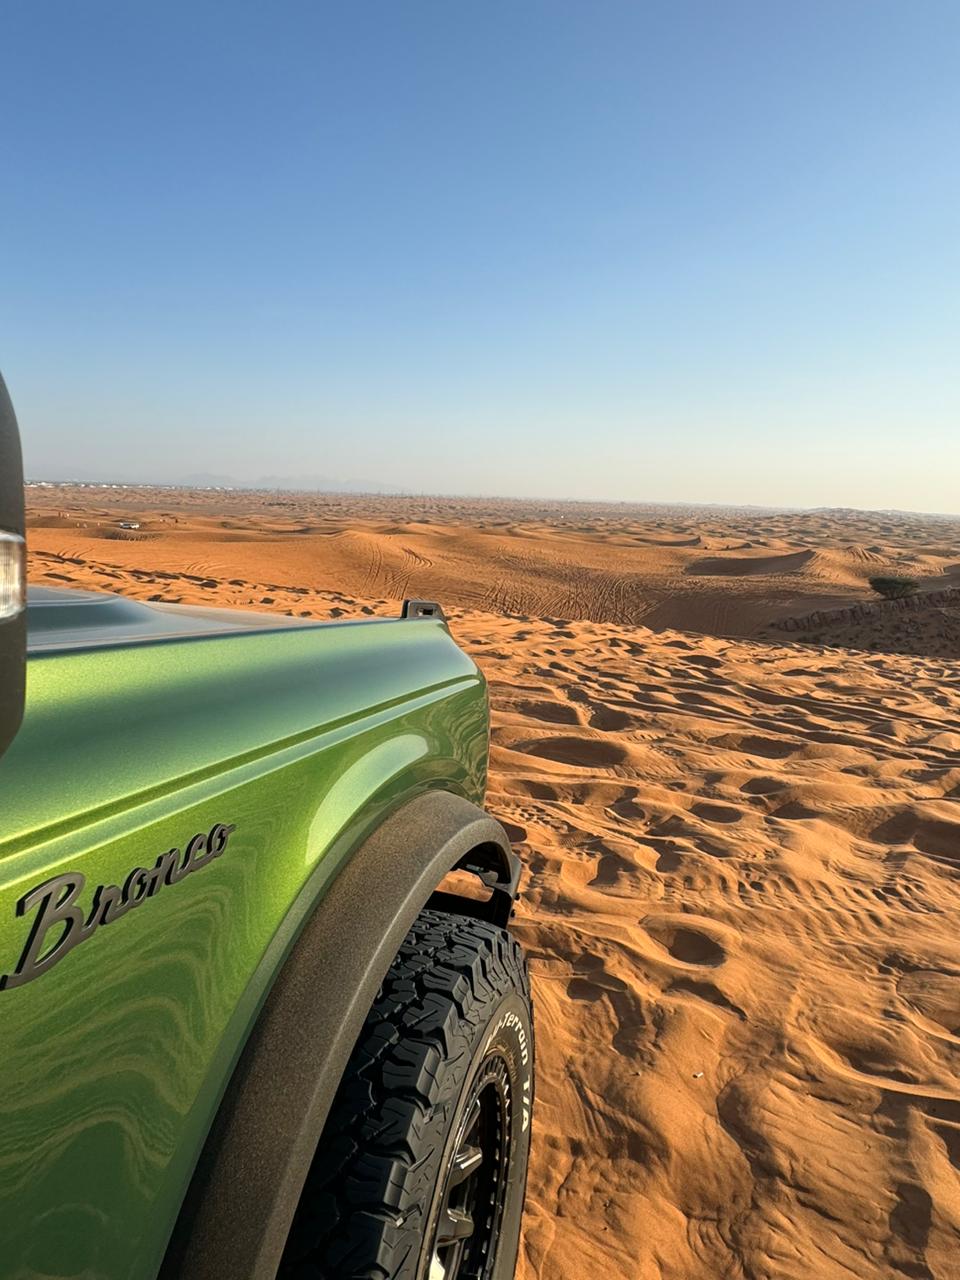 Ford Bronco Dune bashing with the Bronco. Color me impressed! WhatsApp Image 2024-01-14 at 6.23.03 PM